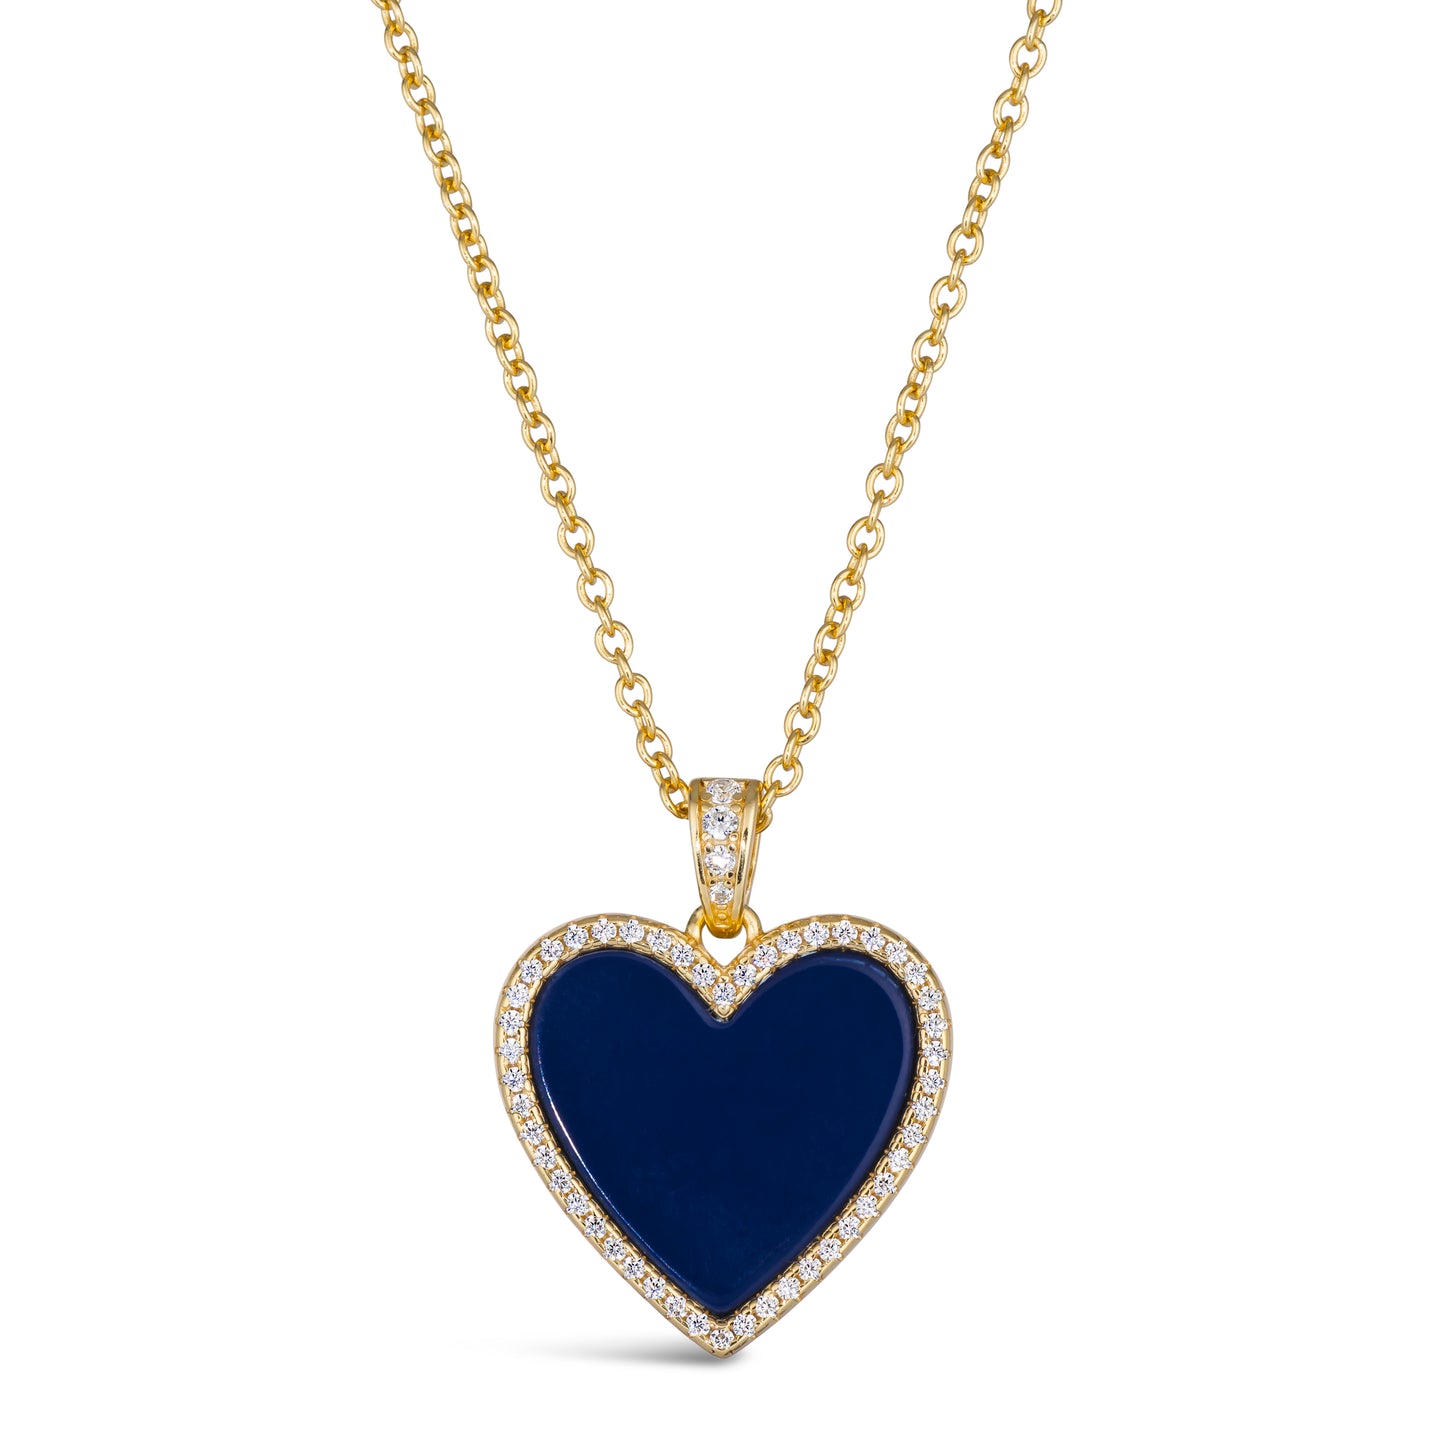 House of Cards 03 Necklace Lapis lazuli Large Heart - Anna Zuckerman Luxury Necklaces